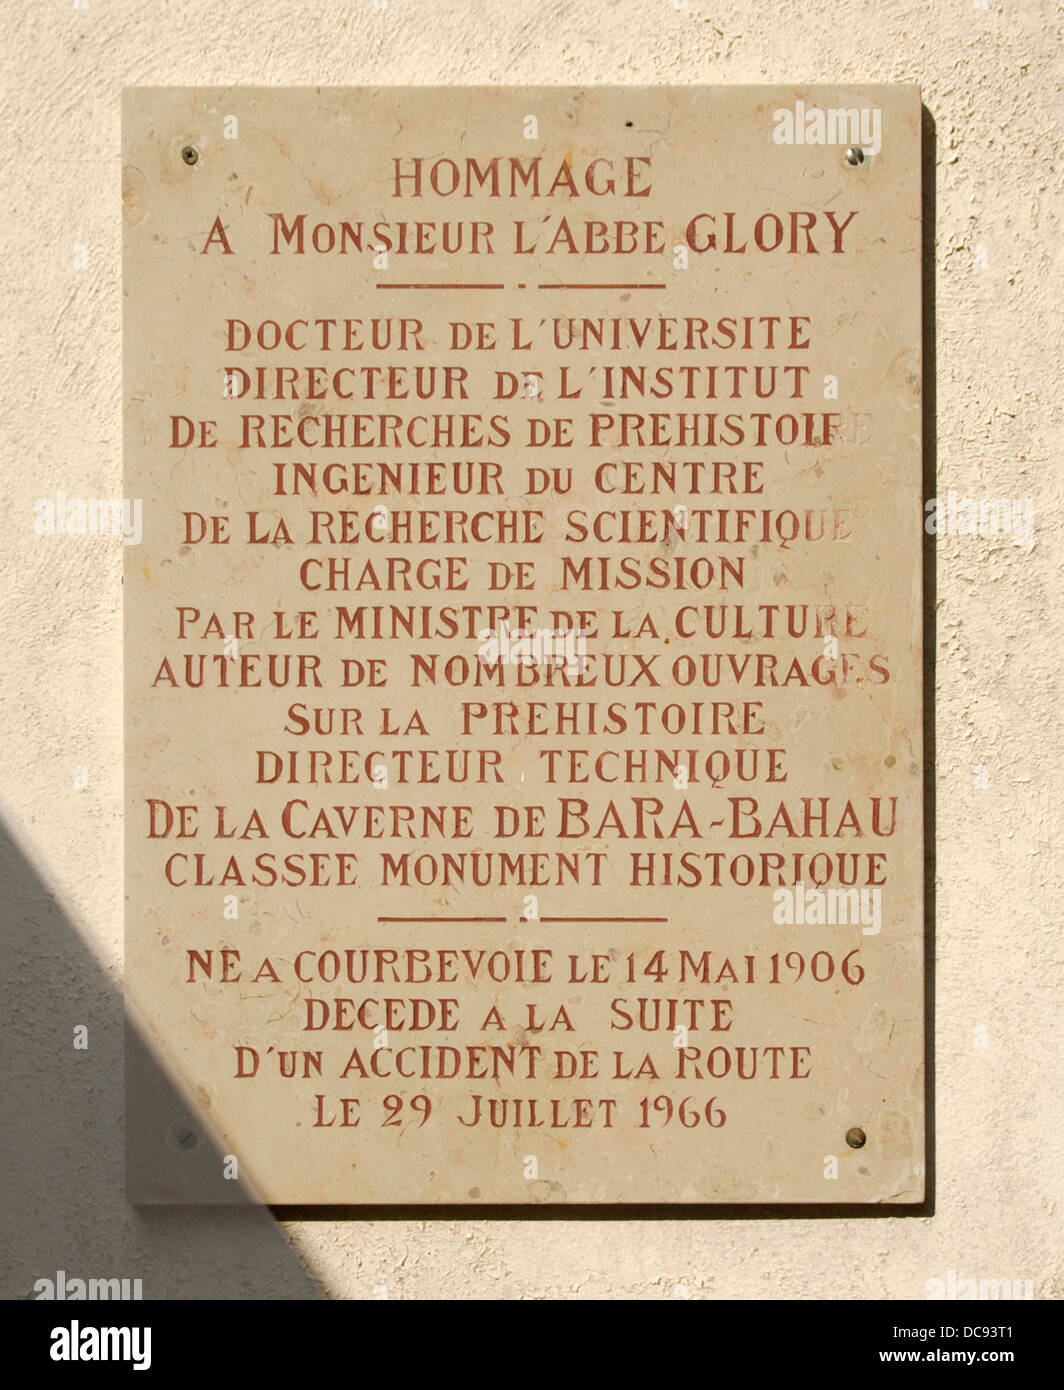 Tribute to Abbot André Glory, at the entrance of the Bara-Bahau prehistoric cave in Le Bugue, Dordogne, France. Stock Photo